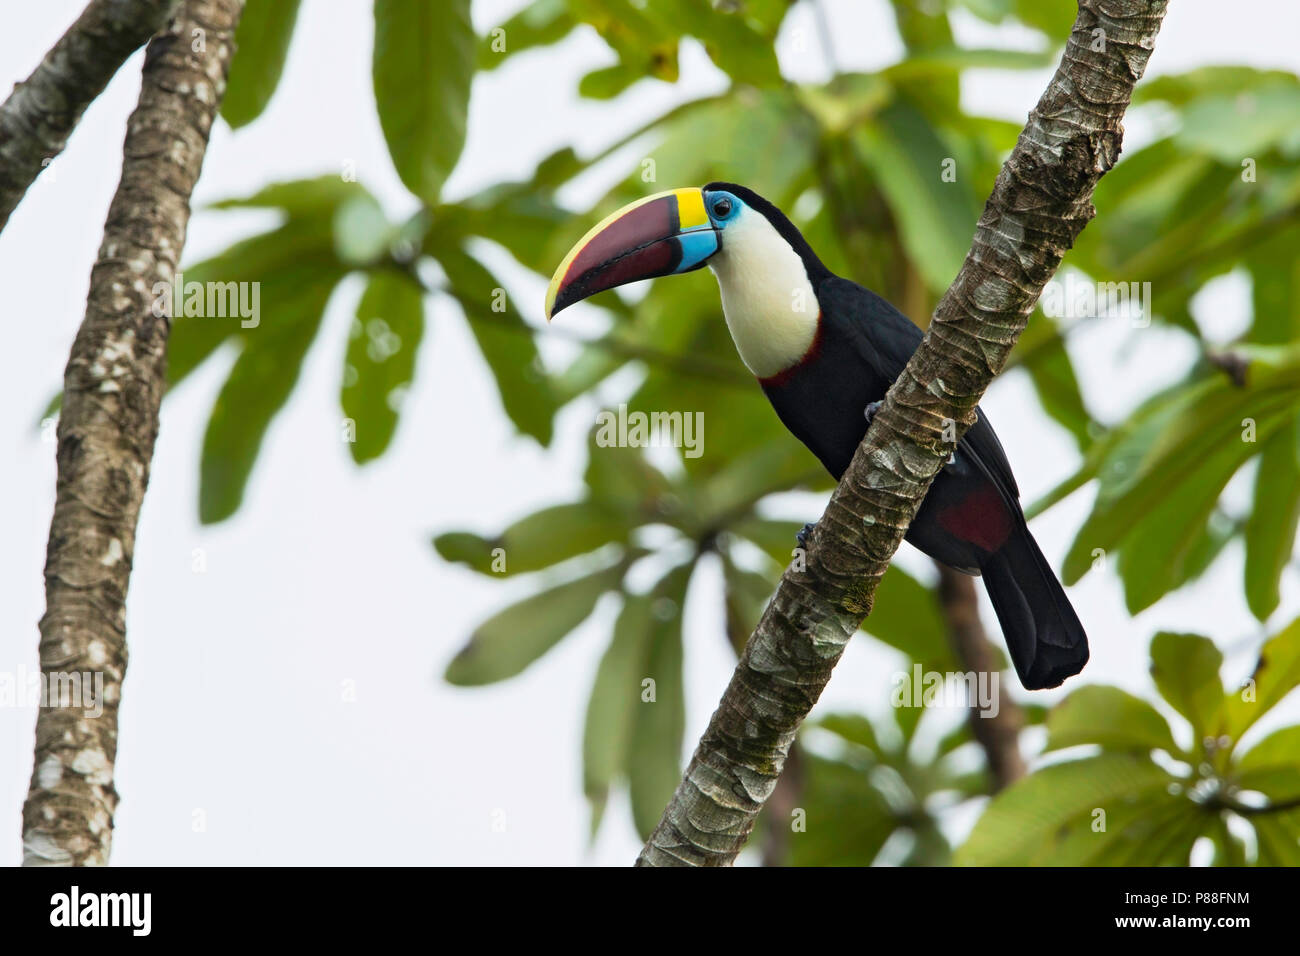 Red-billed Toucan (Ramphastos tucanus) perched in a treetop Stock Photo